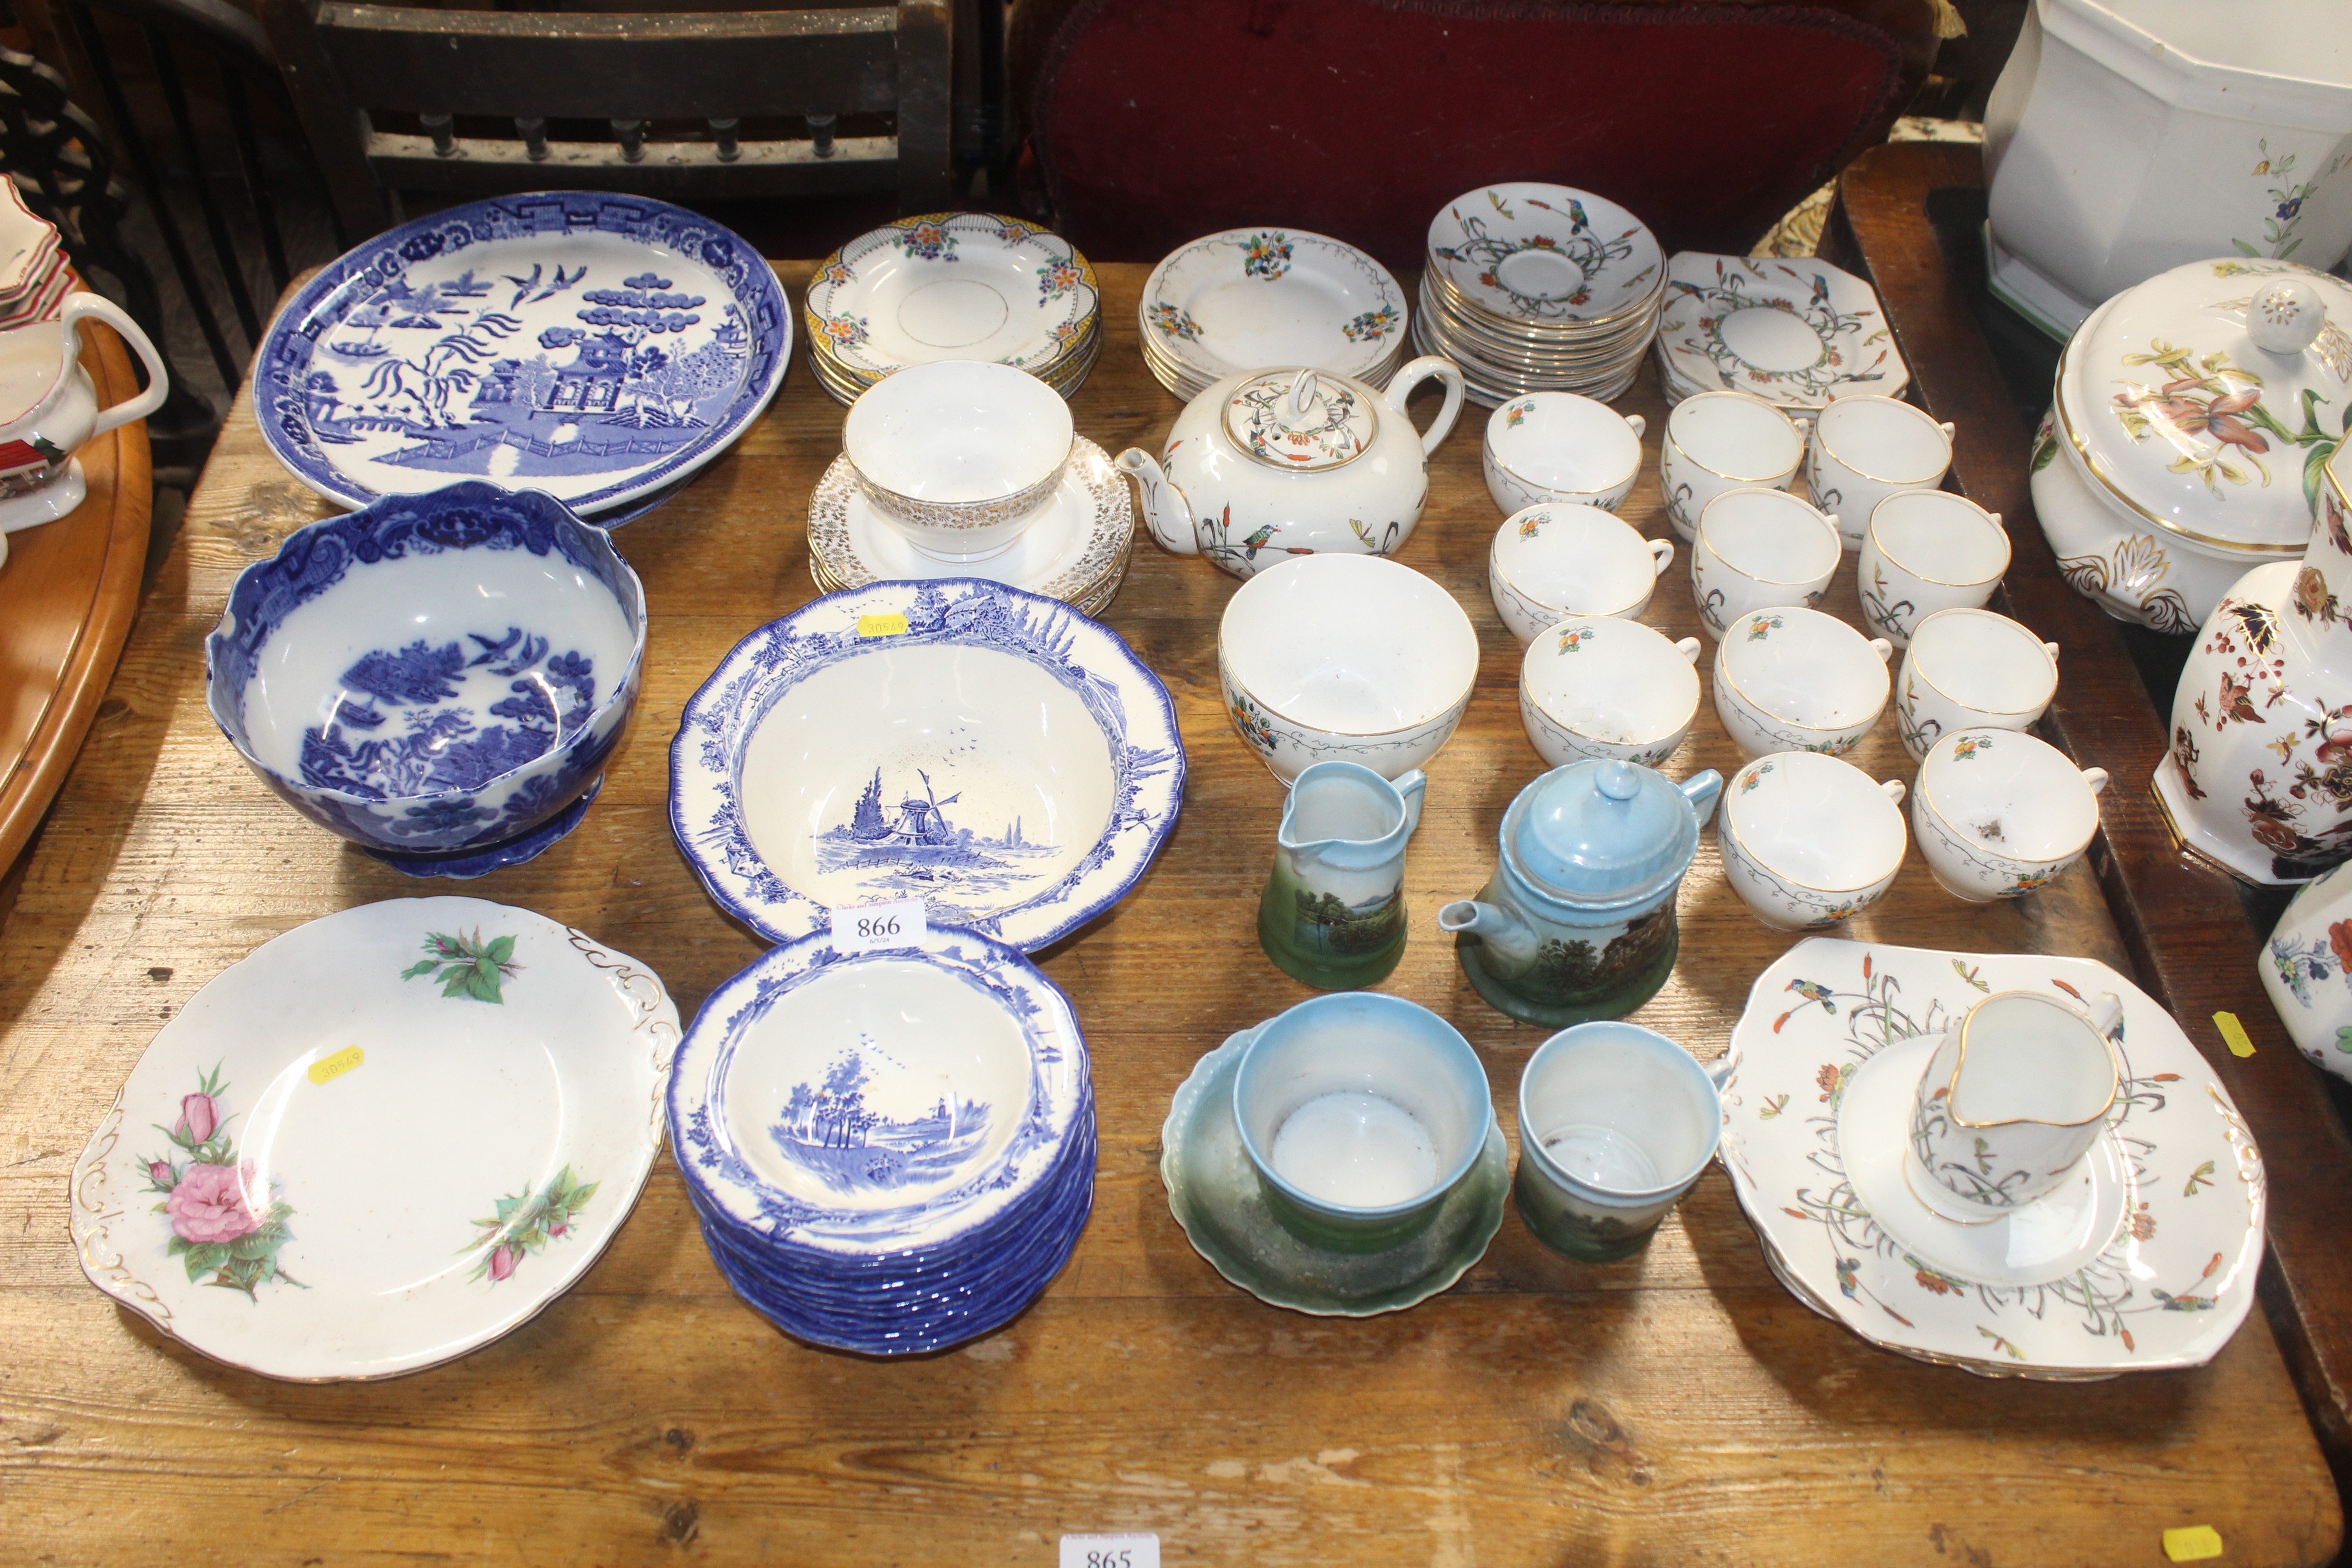 A collection of standard China tea ware; blue and white Willow pattern cake stand; Royal Doulton "